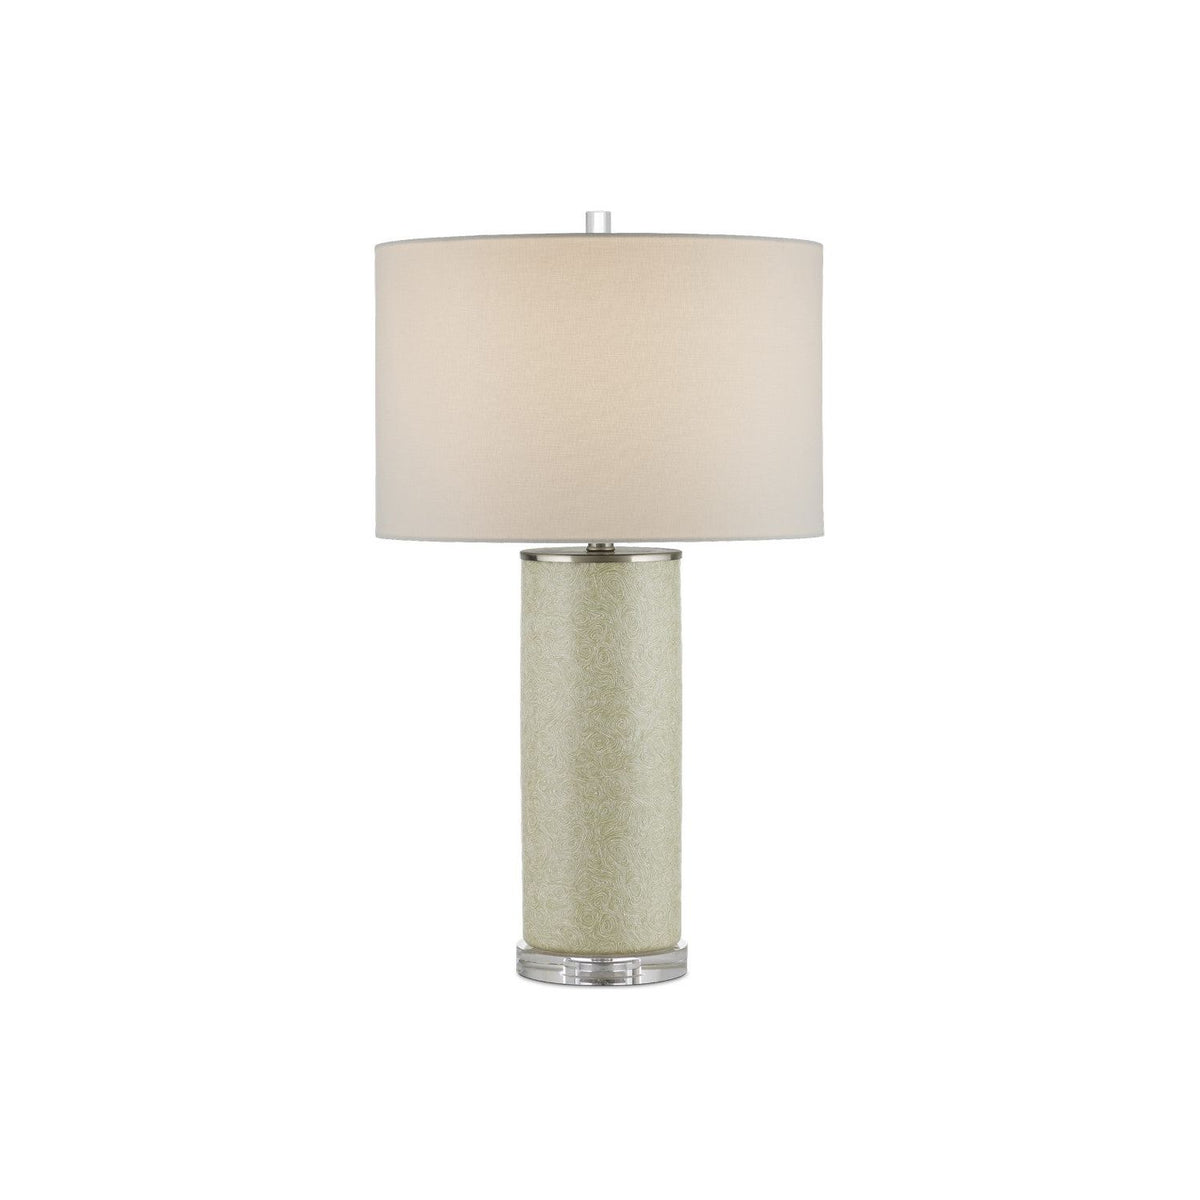 Currey and Company - 6000-0938 - One Light Table Lamp - Green/Off-White/Clear/Satin Nickel